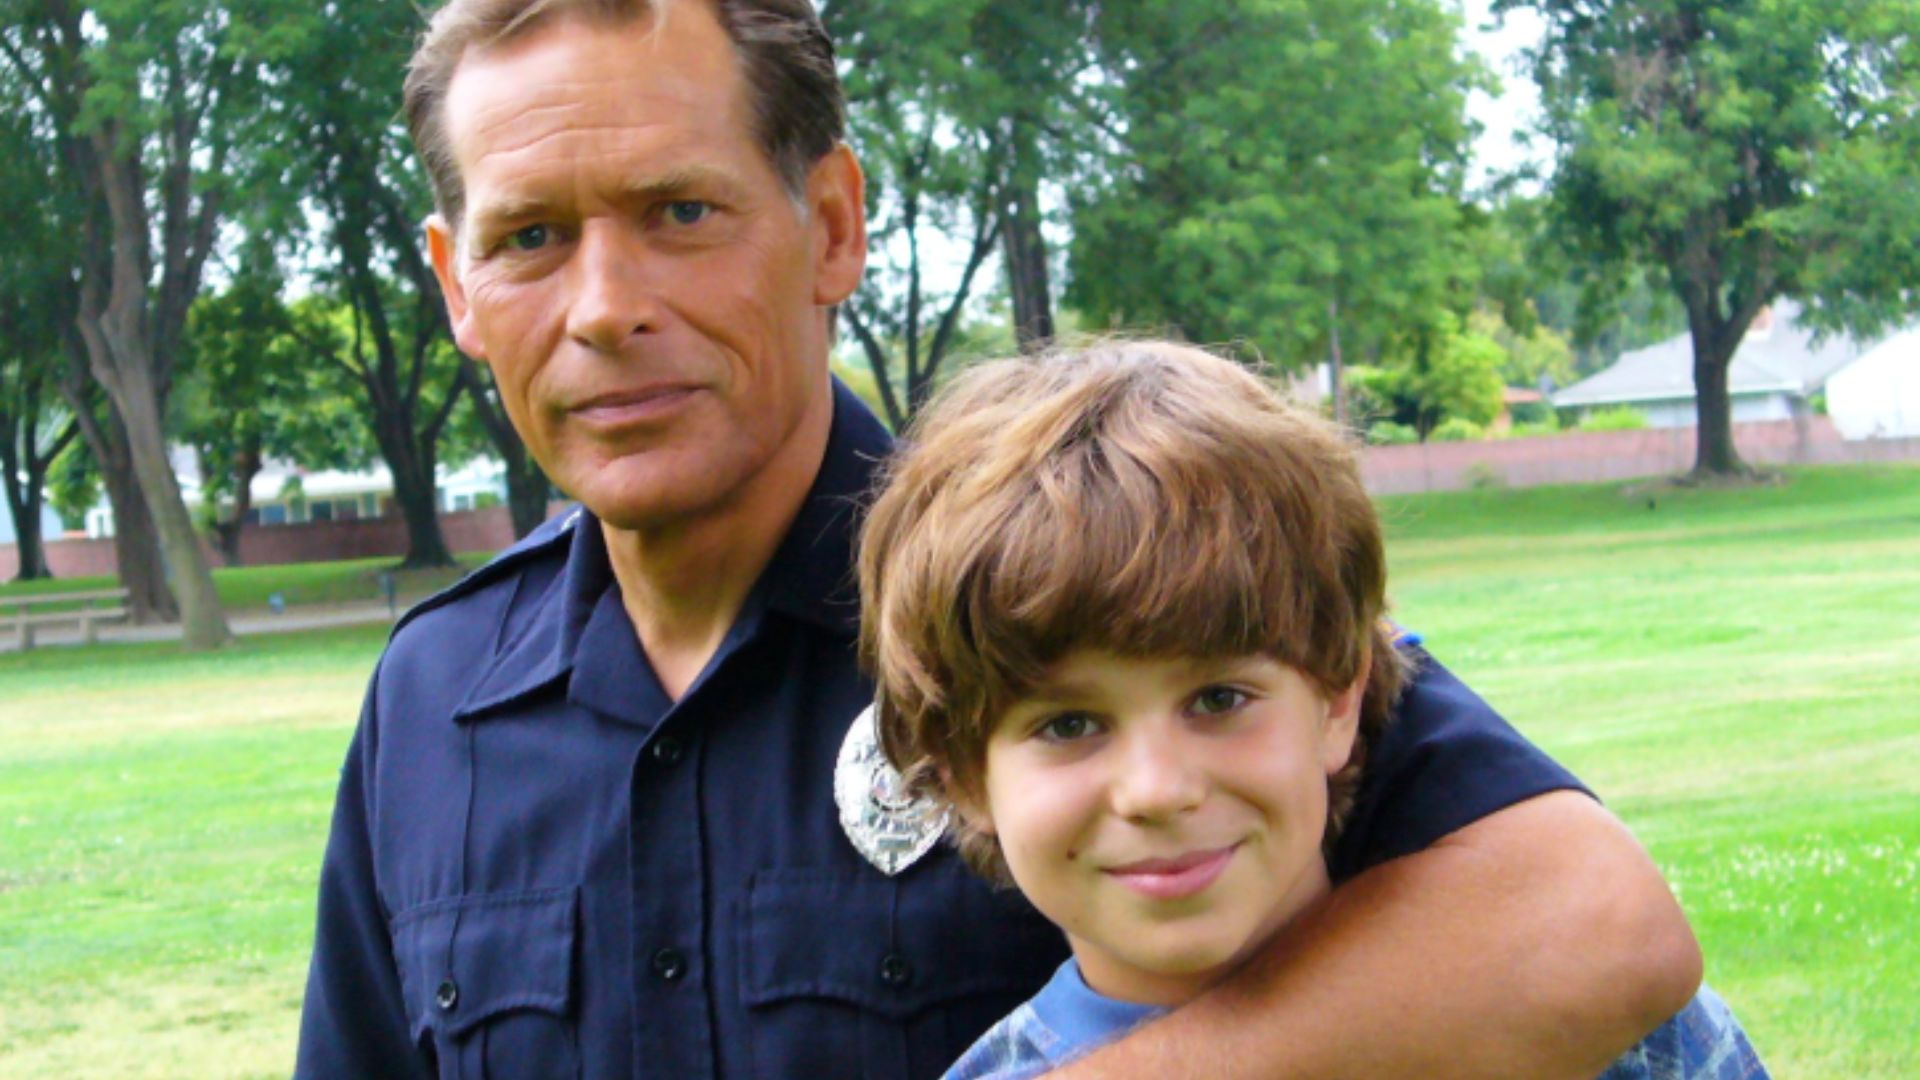 James Remar and Dominic Janes (young Dexter)